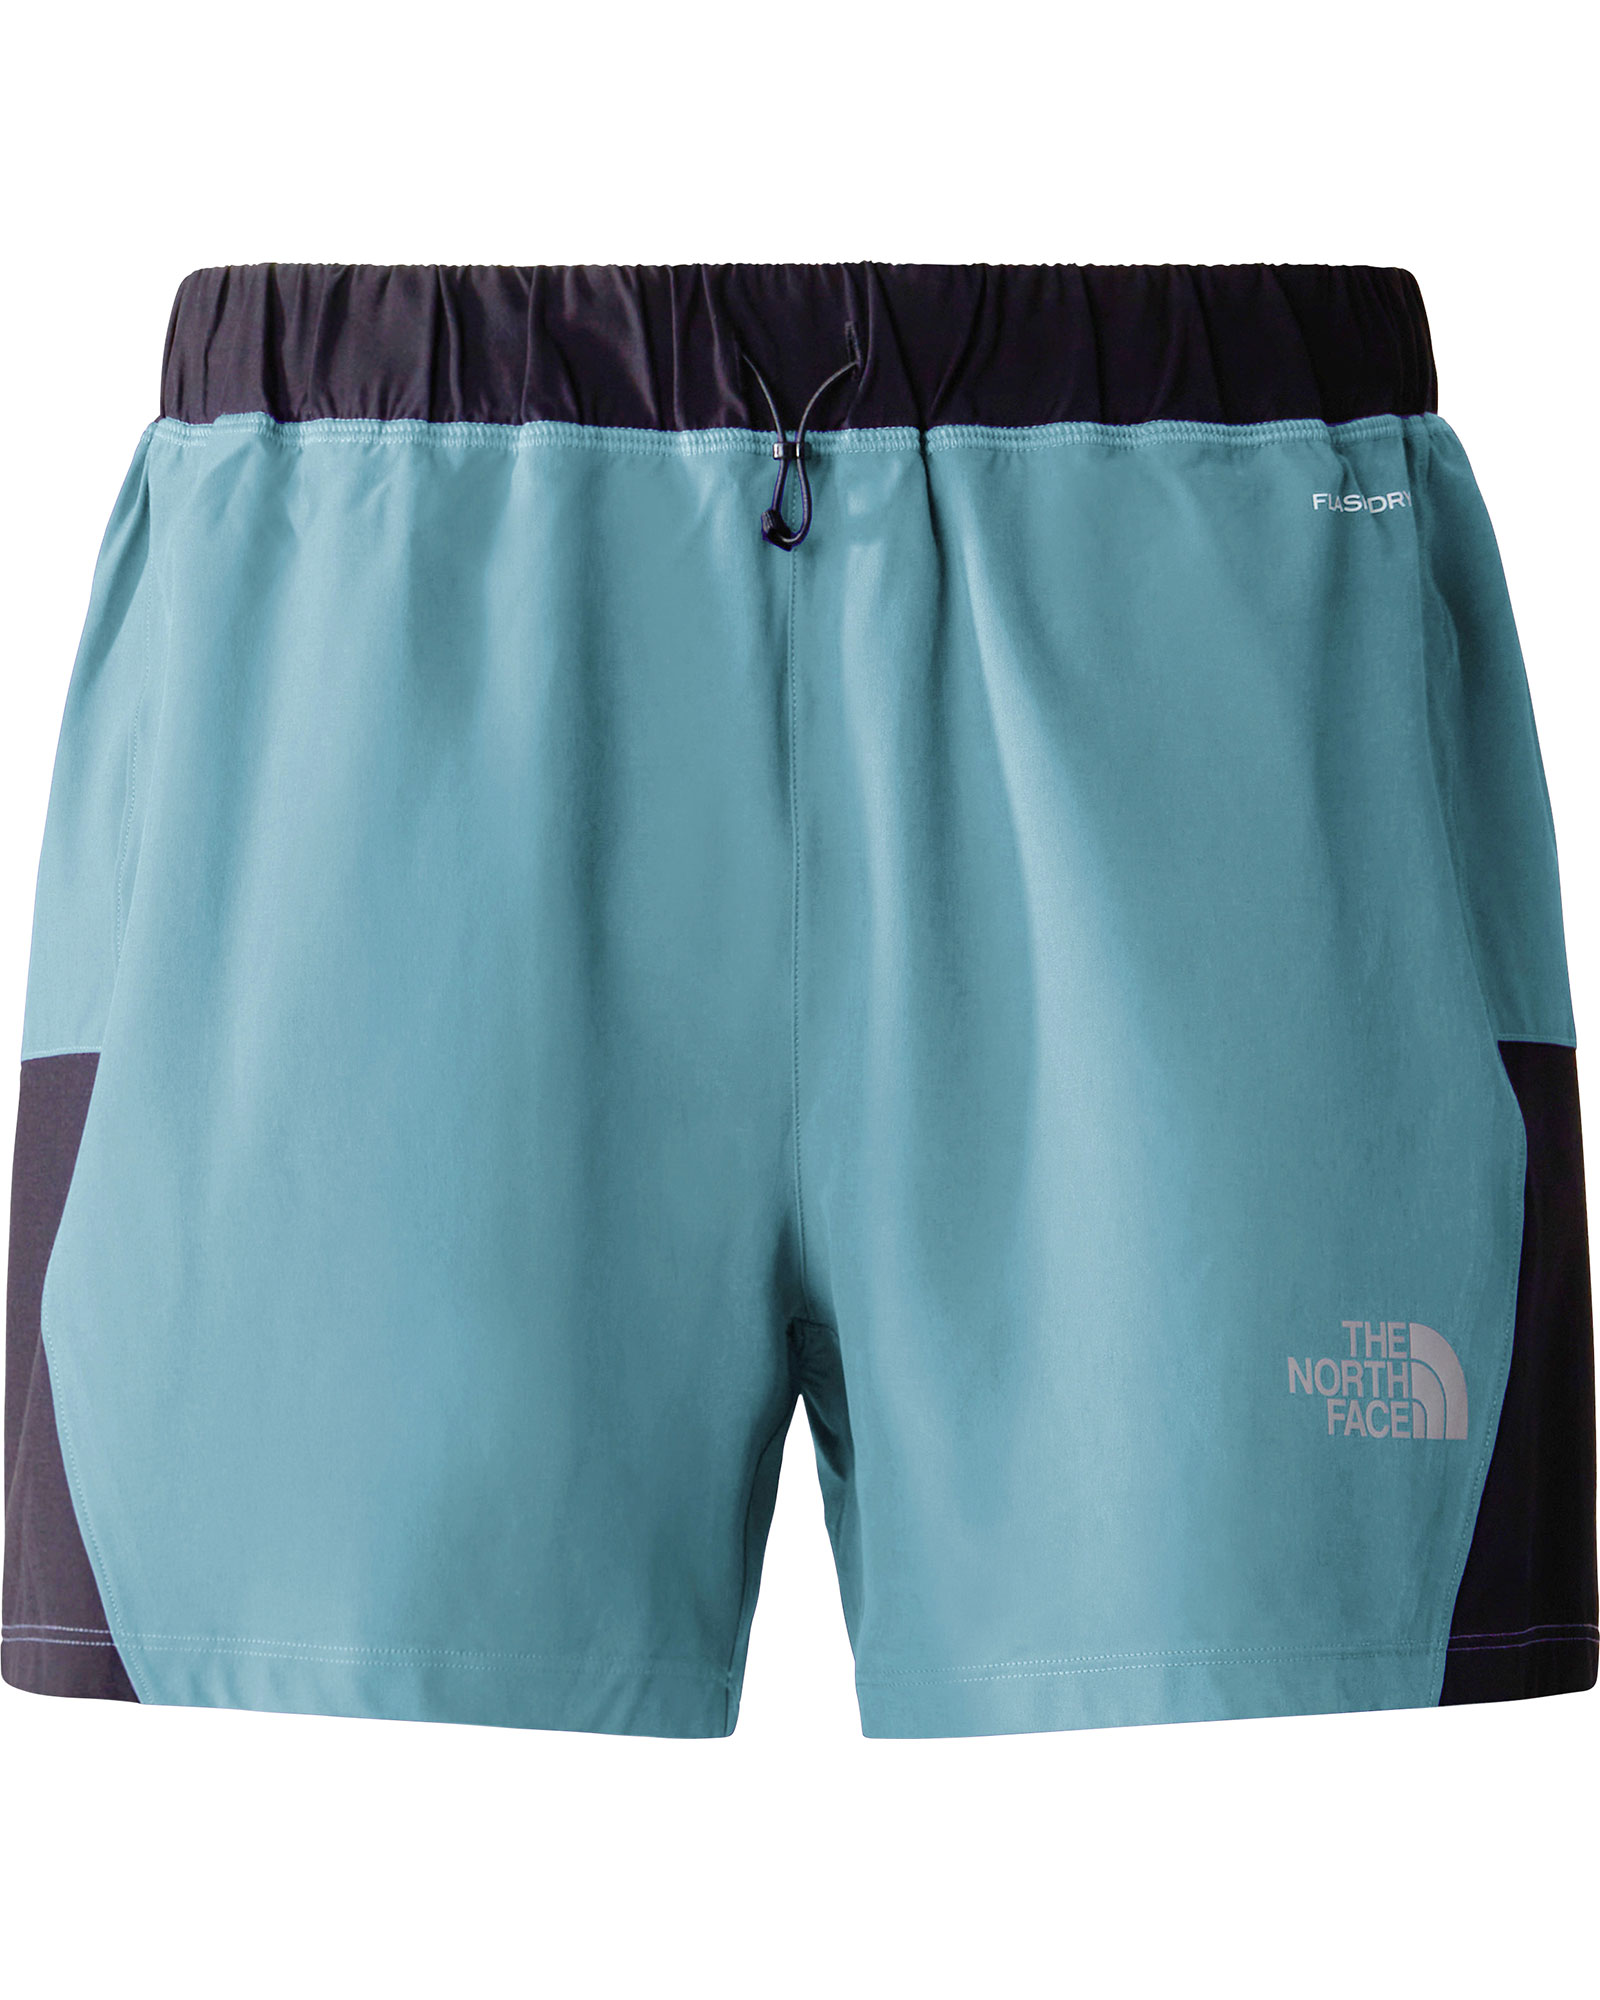 The North Face Women’s 2in1 Shorts - Reef Waters/TNF Black S